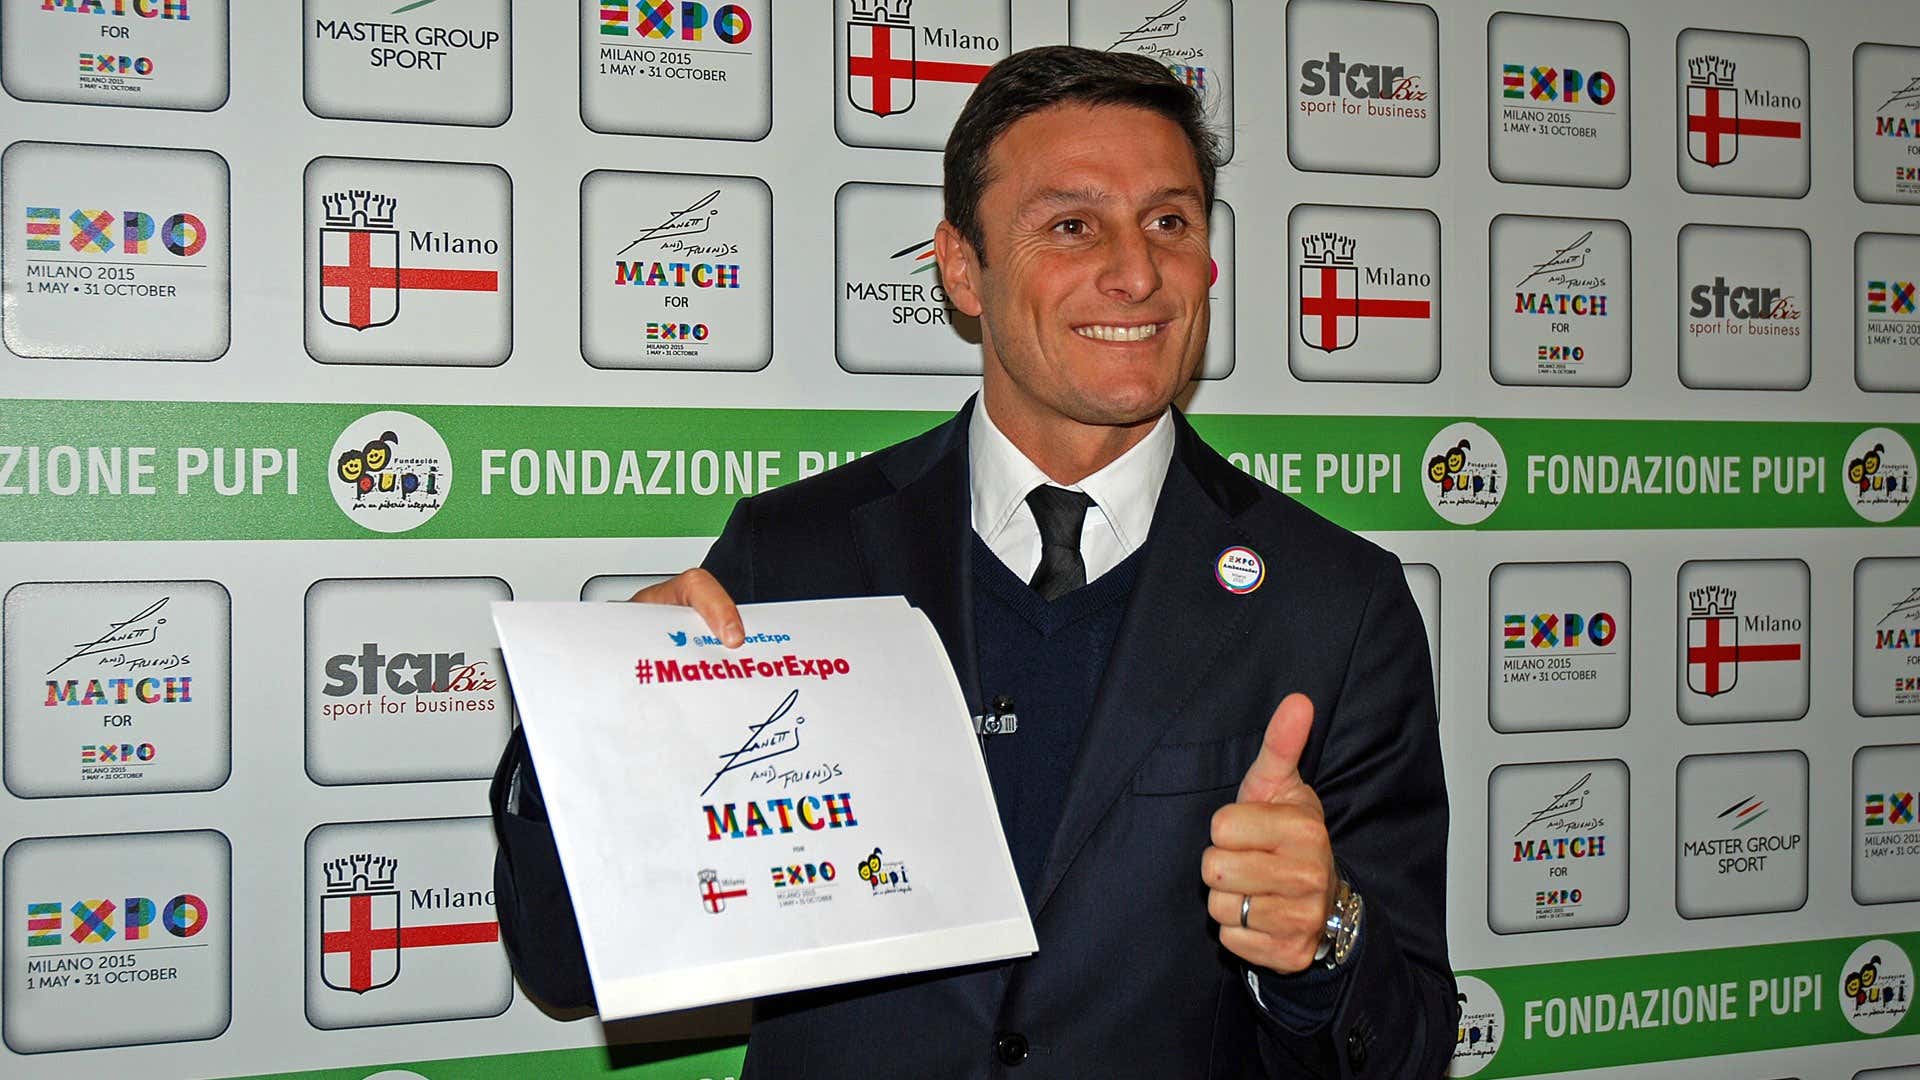 Javier Zanetti Match for EXPO